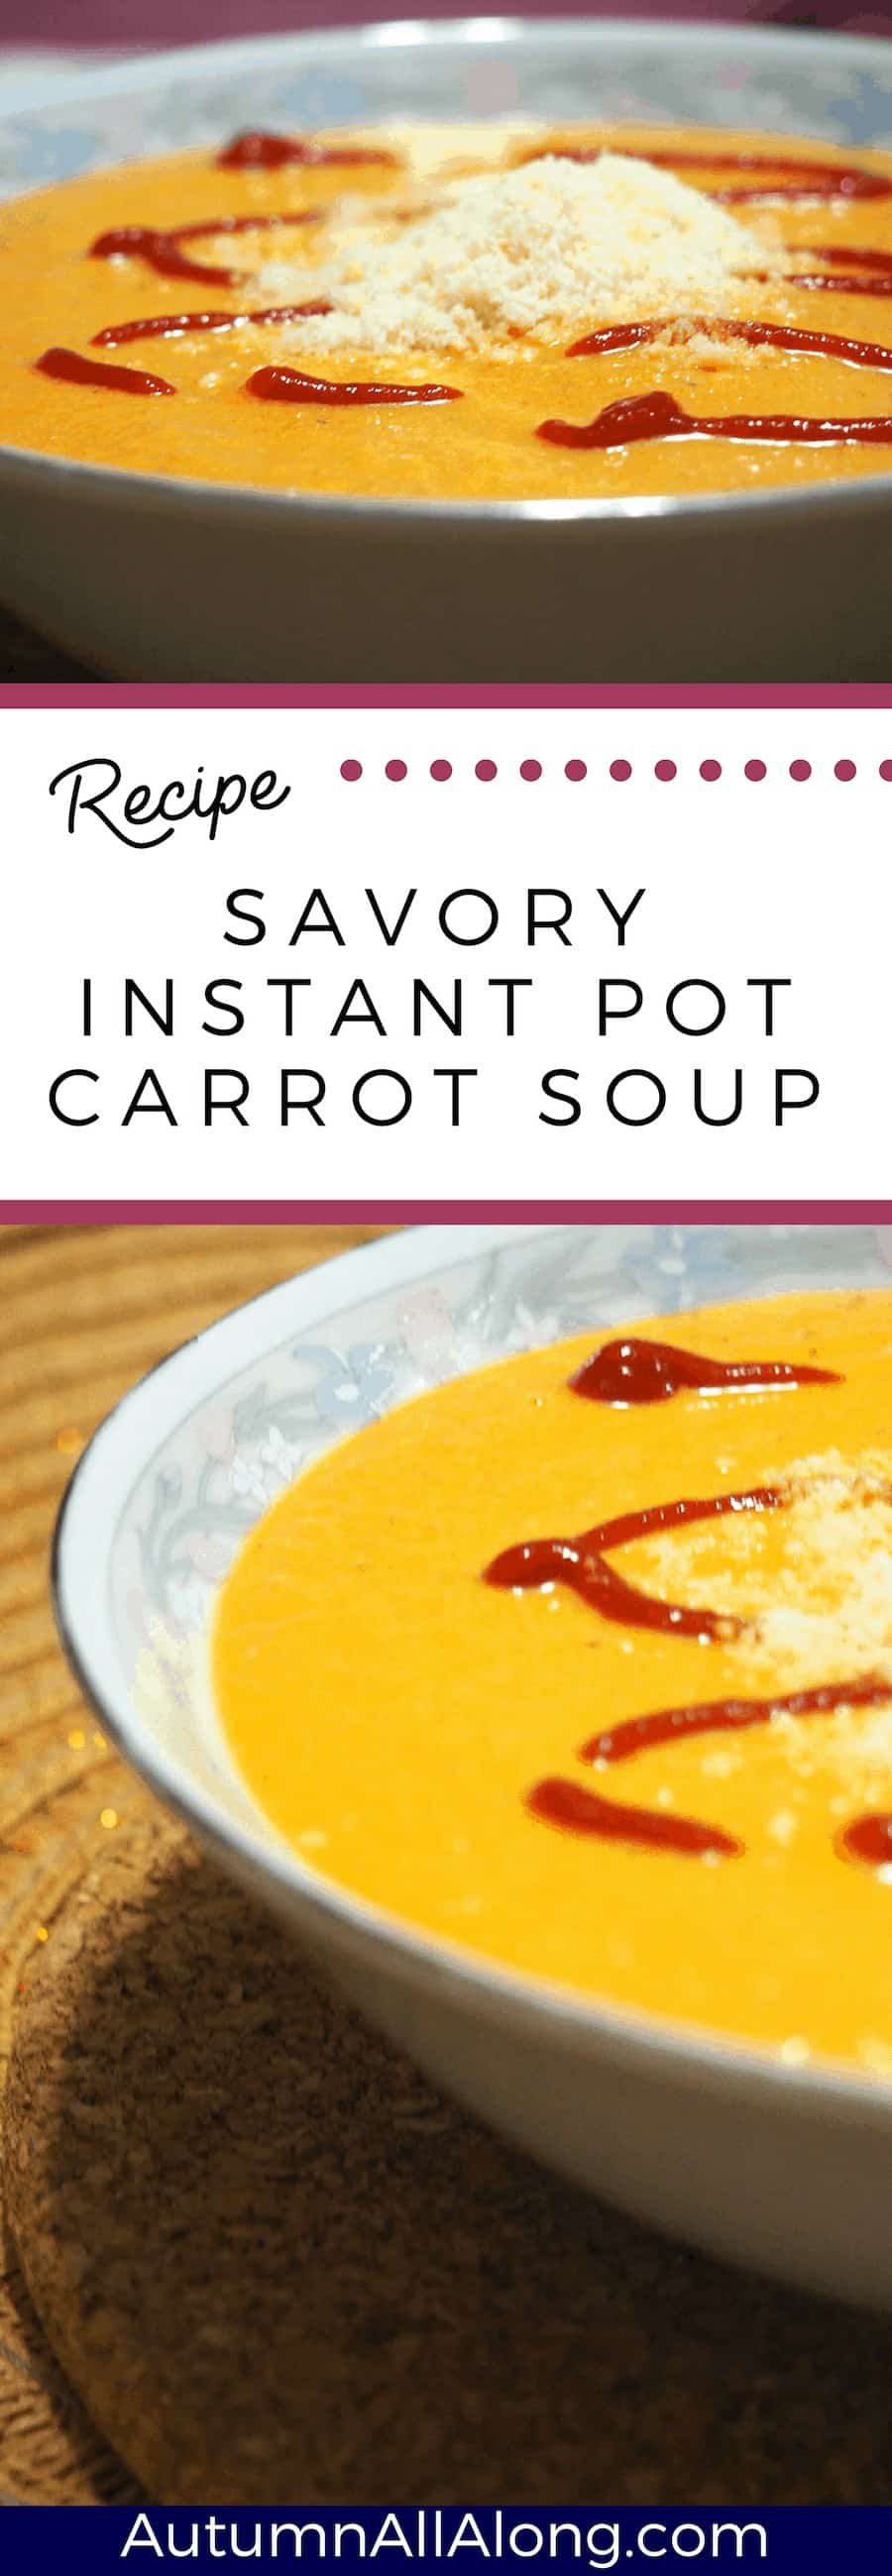 This extremely easy and savory instant pot carrot soup is going to be one you rotate regularly with your transition into fall! | via Autumn All Along